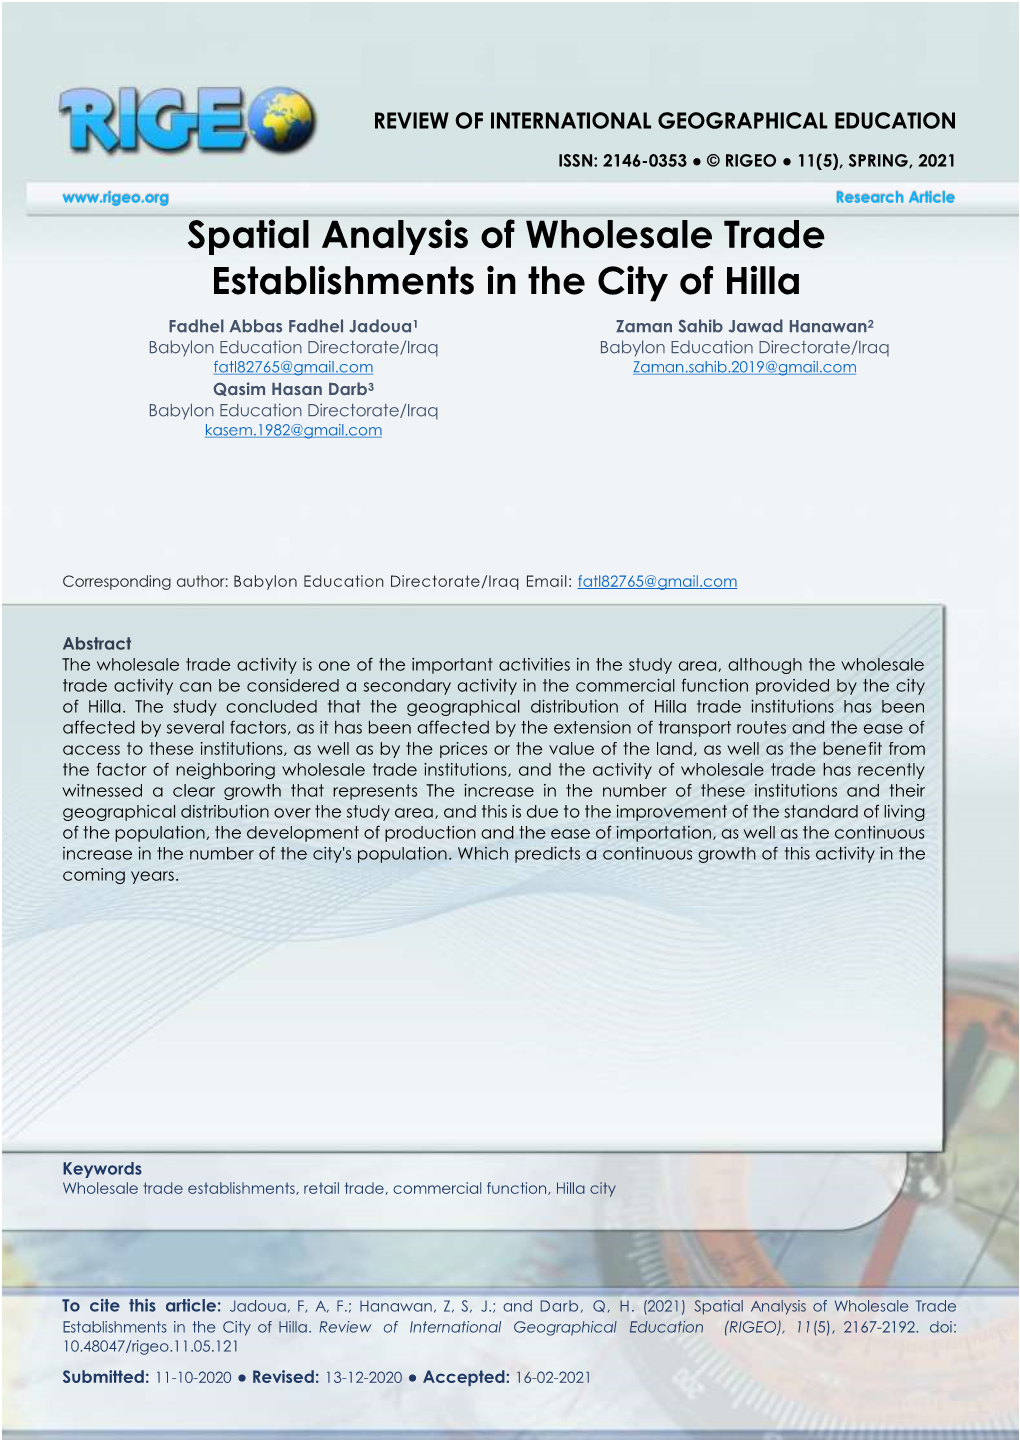 Spatial Analysis of Wholesale Trade Establishments in the City of Hilla